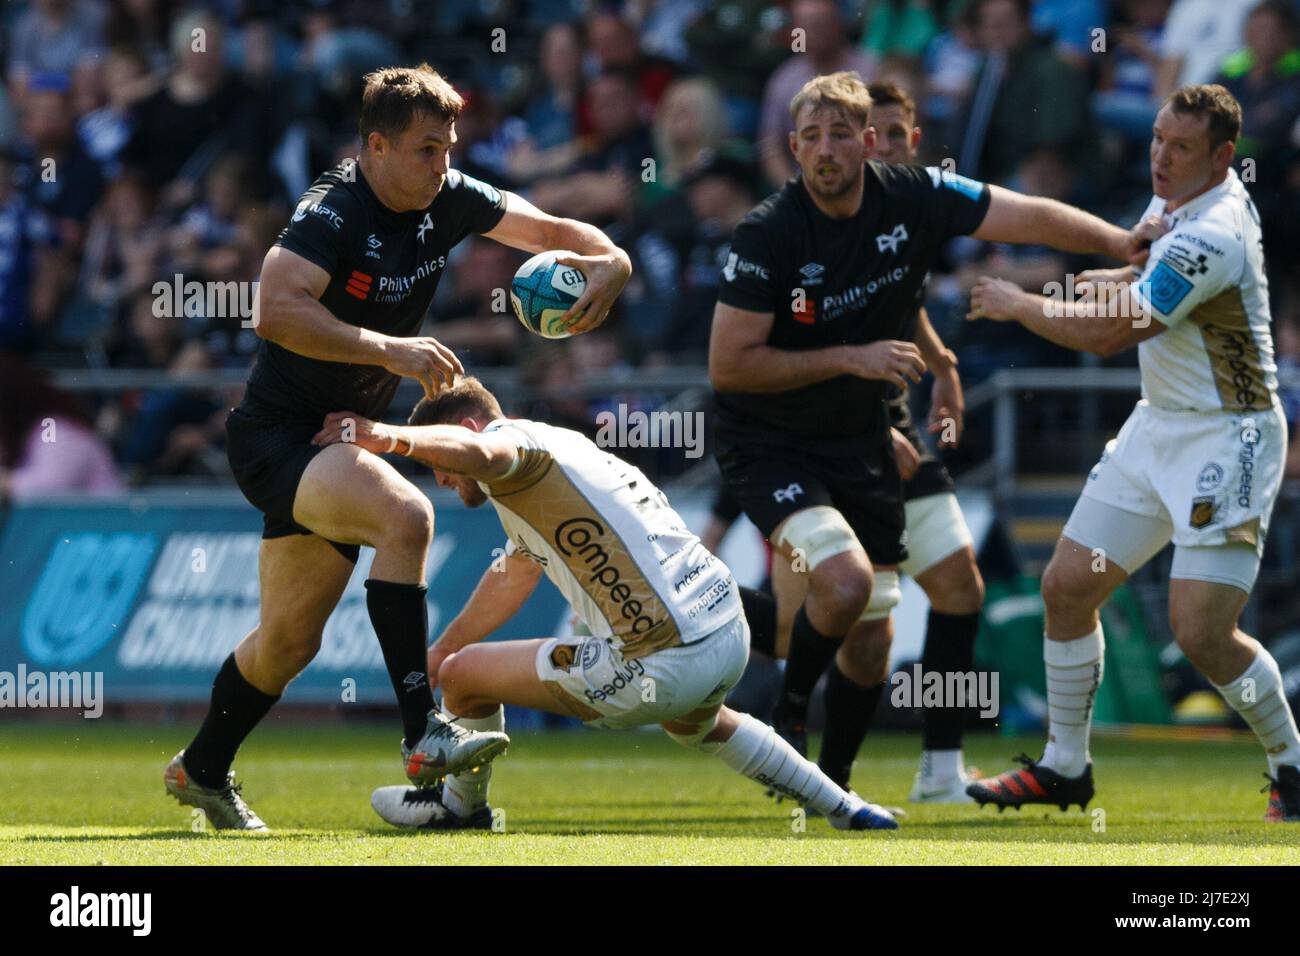 Swansea, UK. 8 May, 2022. Michael Collins of Ospreys during the Ospreys v Dragons United Rugby Championship Match. Credit: Gruffydd Thomas/Alamy Stock Photo